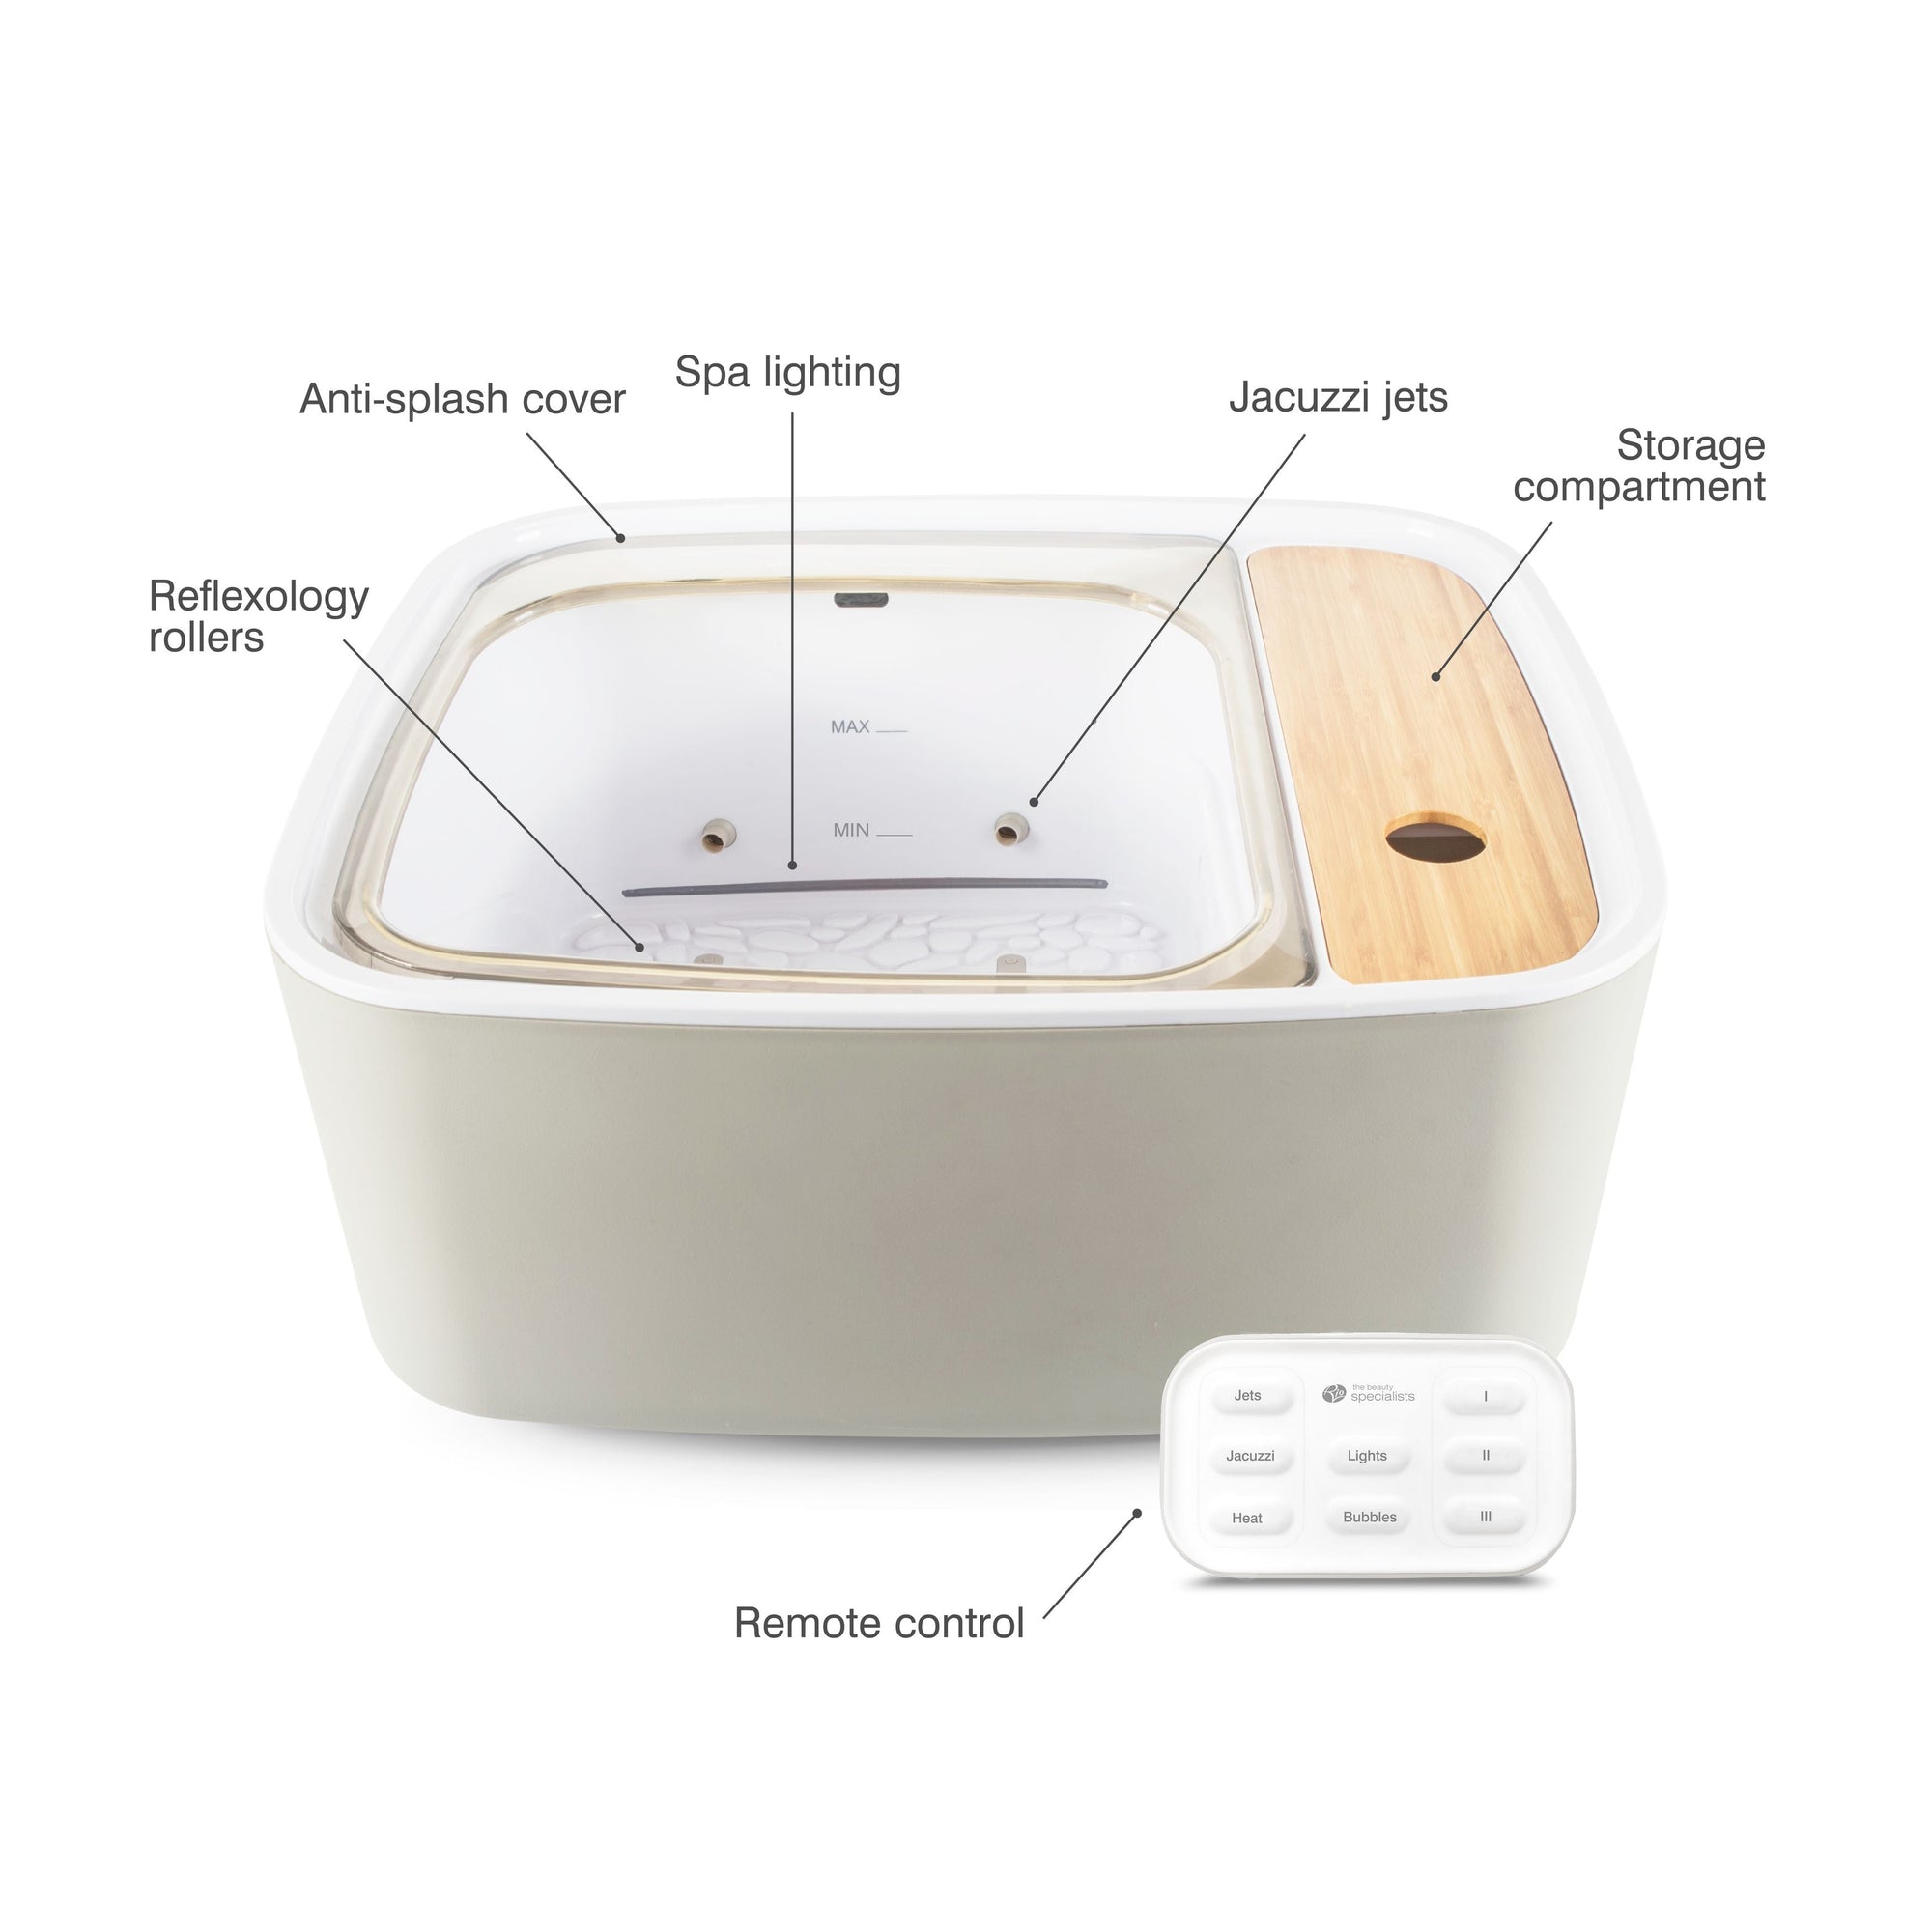 Scandinavian jacuzzi foot spa with arrows labelling remote control, storage compartment, jacuzzi jets, spa lighting, anti-splash cover and reflexology rollers